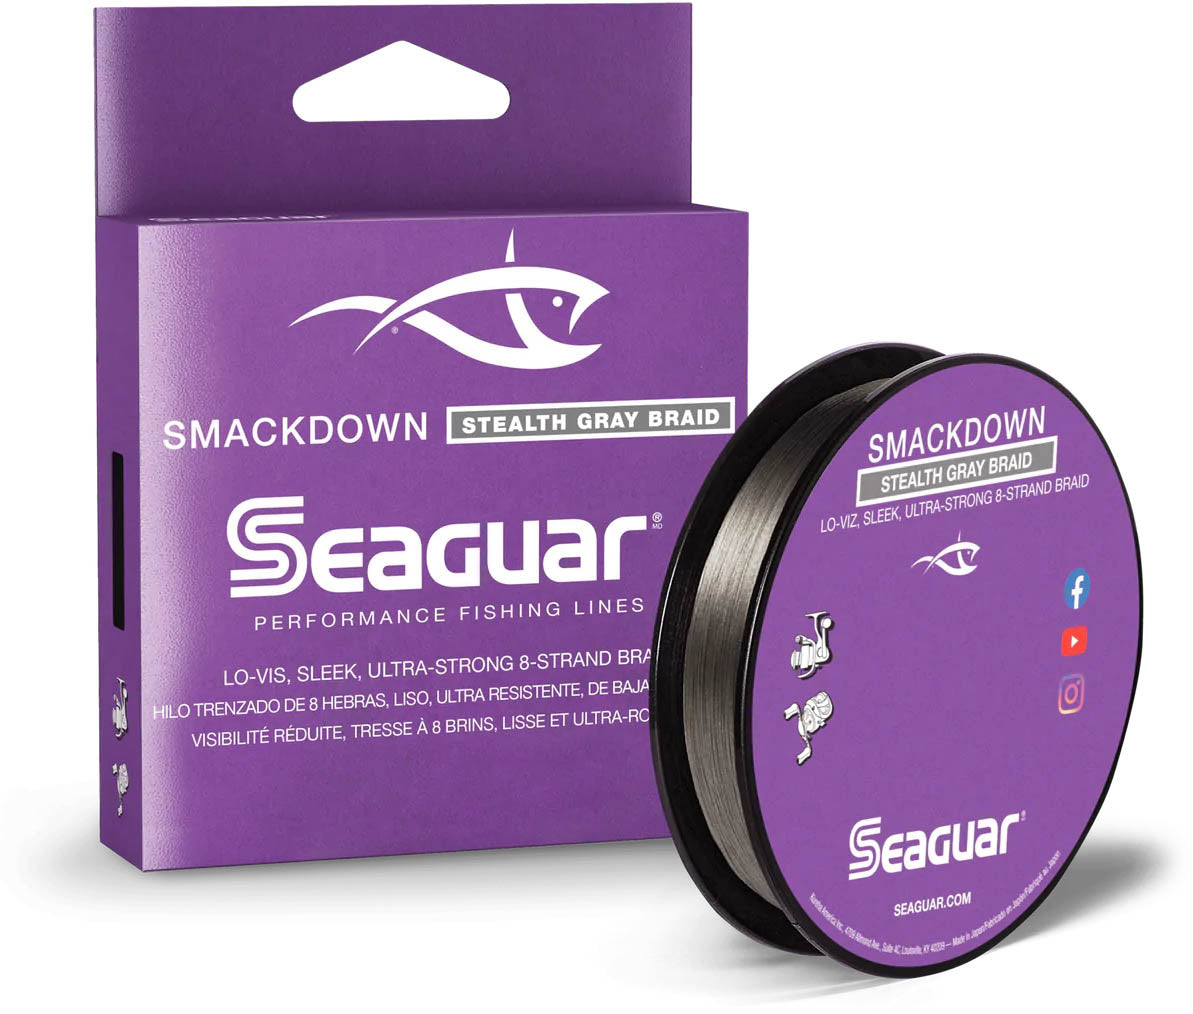 Seaguar Smackdown Braid 150 Yards Stealth Gray — Discount Tackle